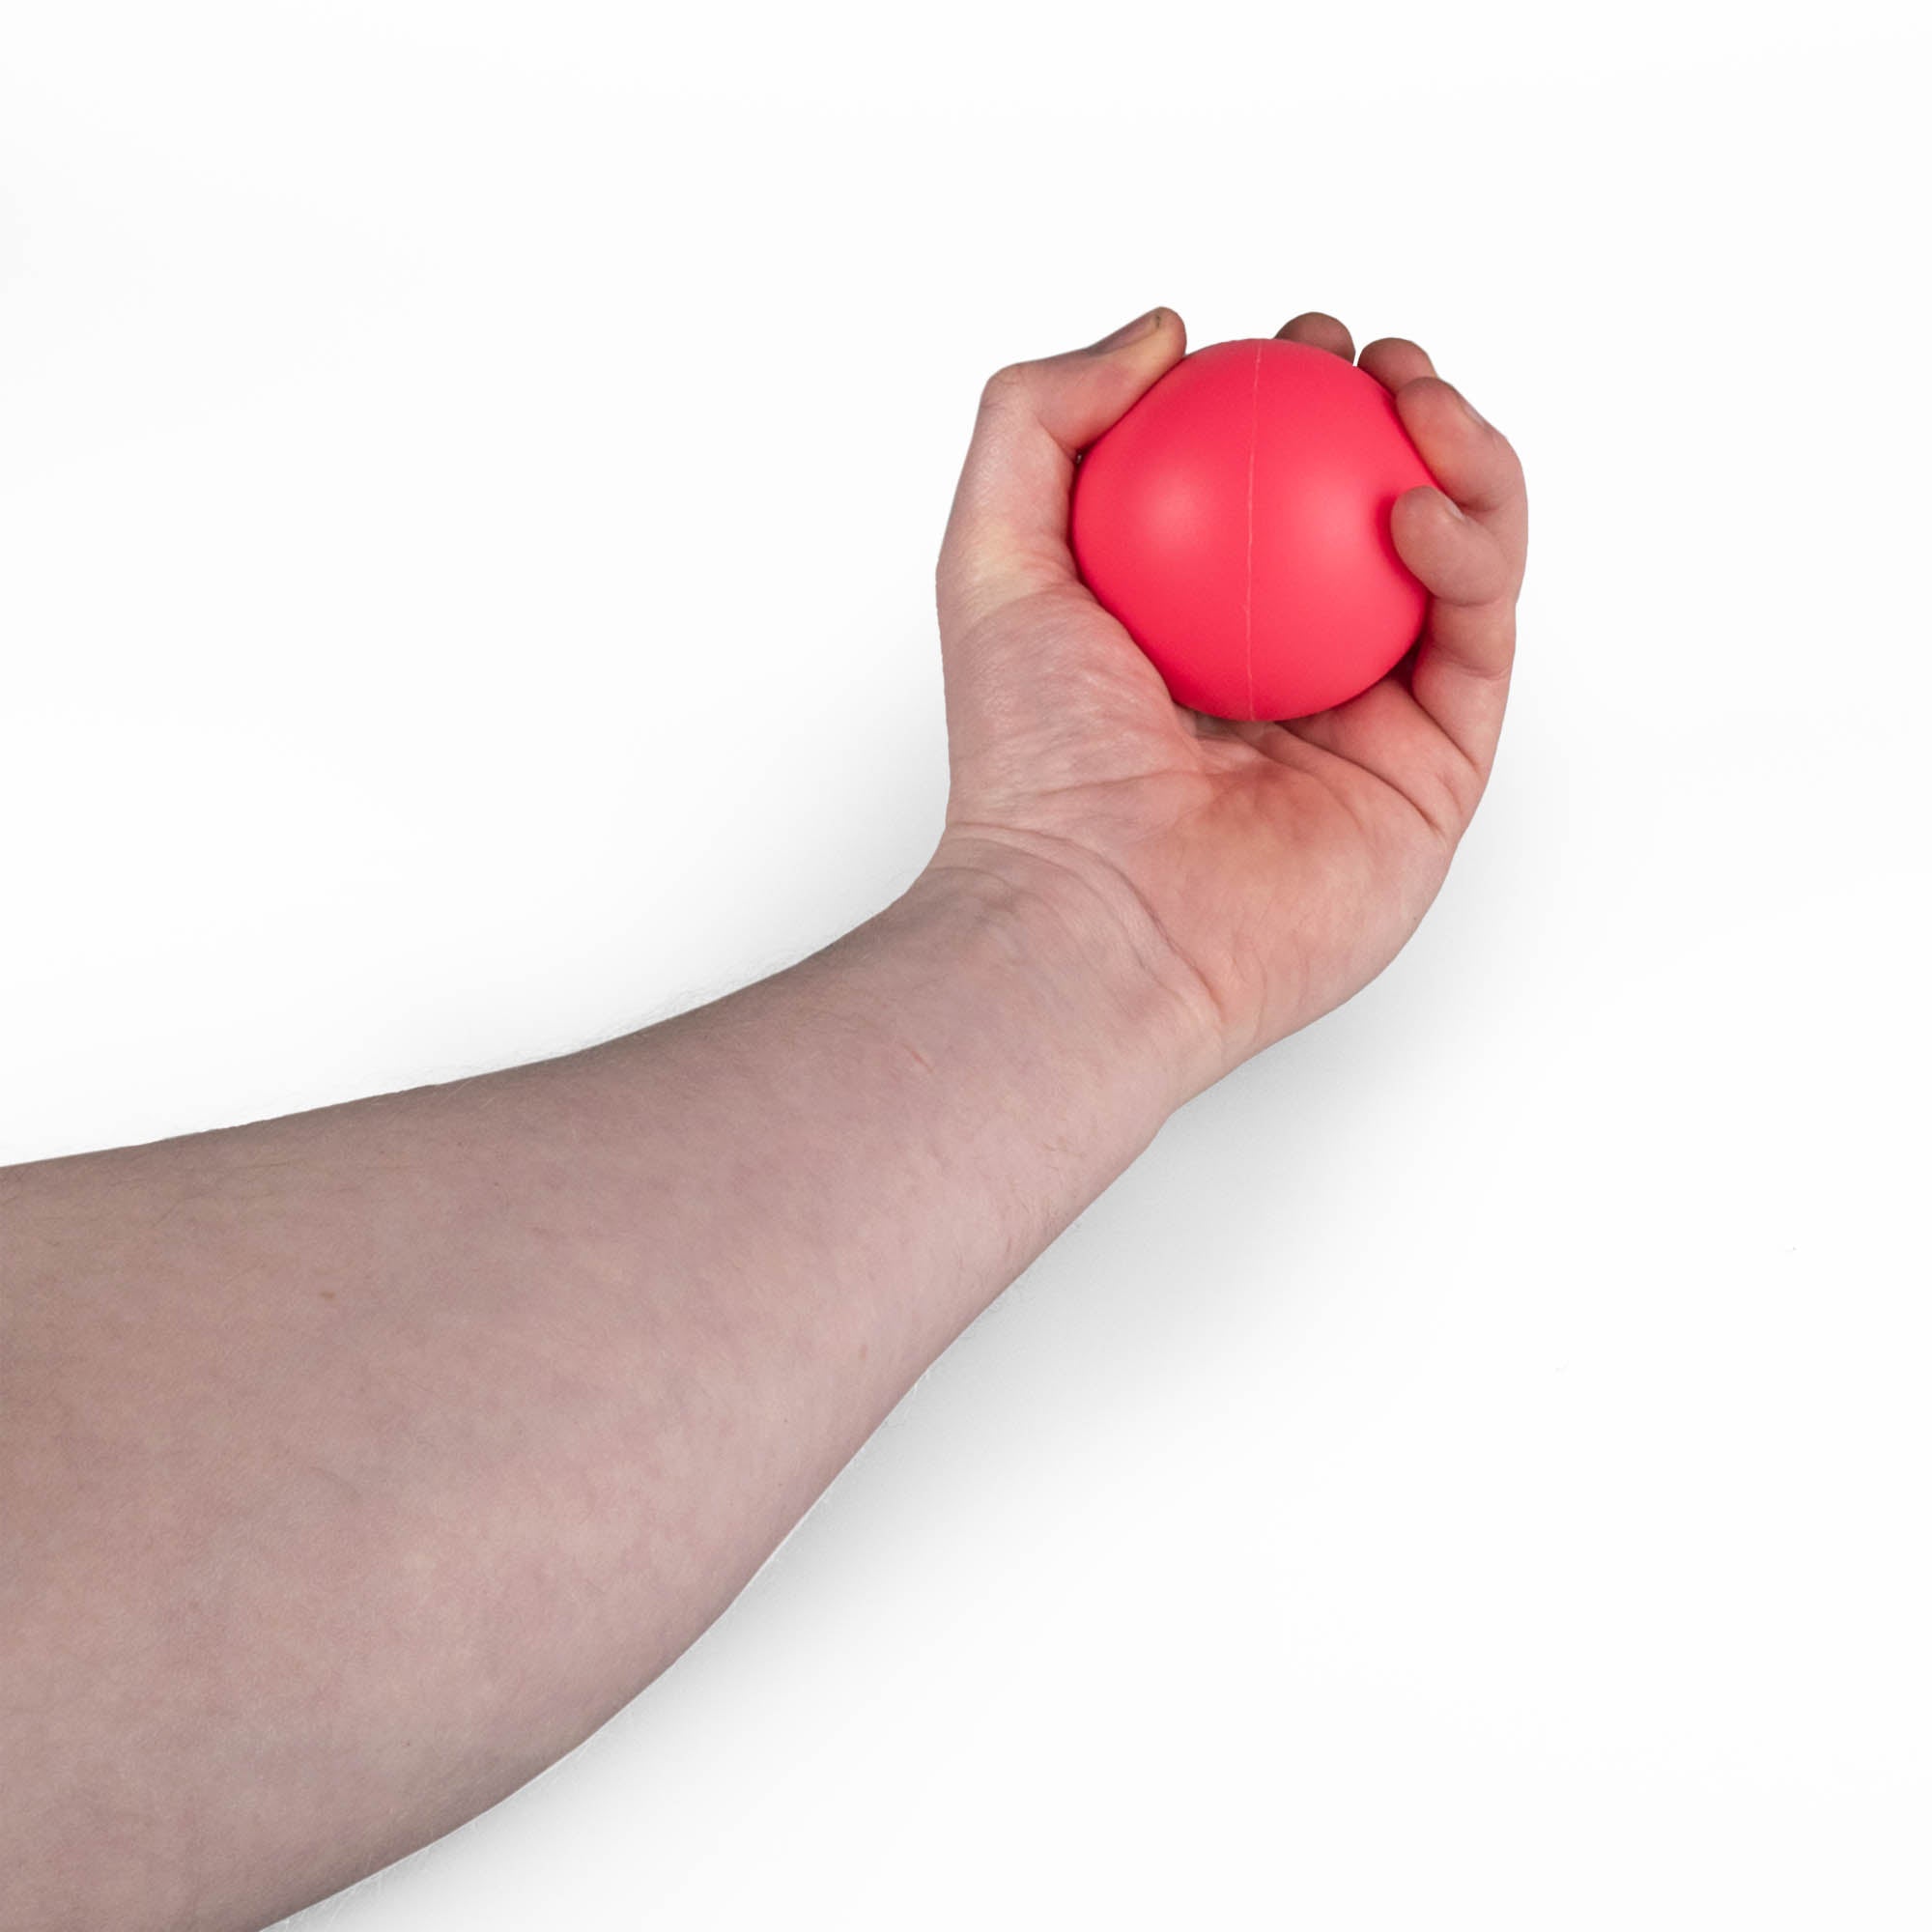 MMX 67mm juggling ball pink in hand